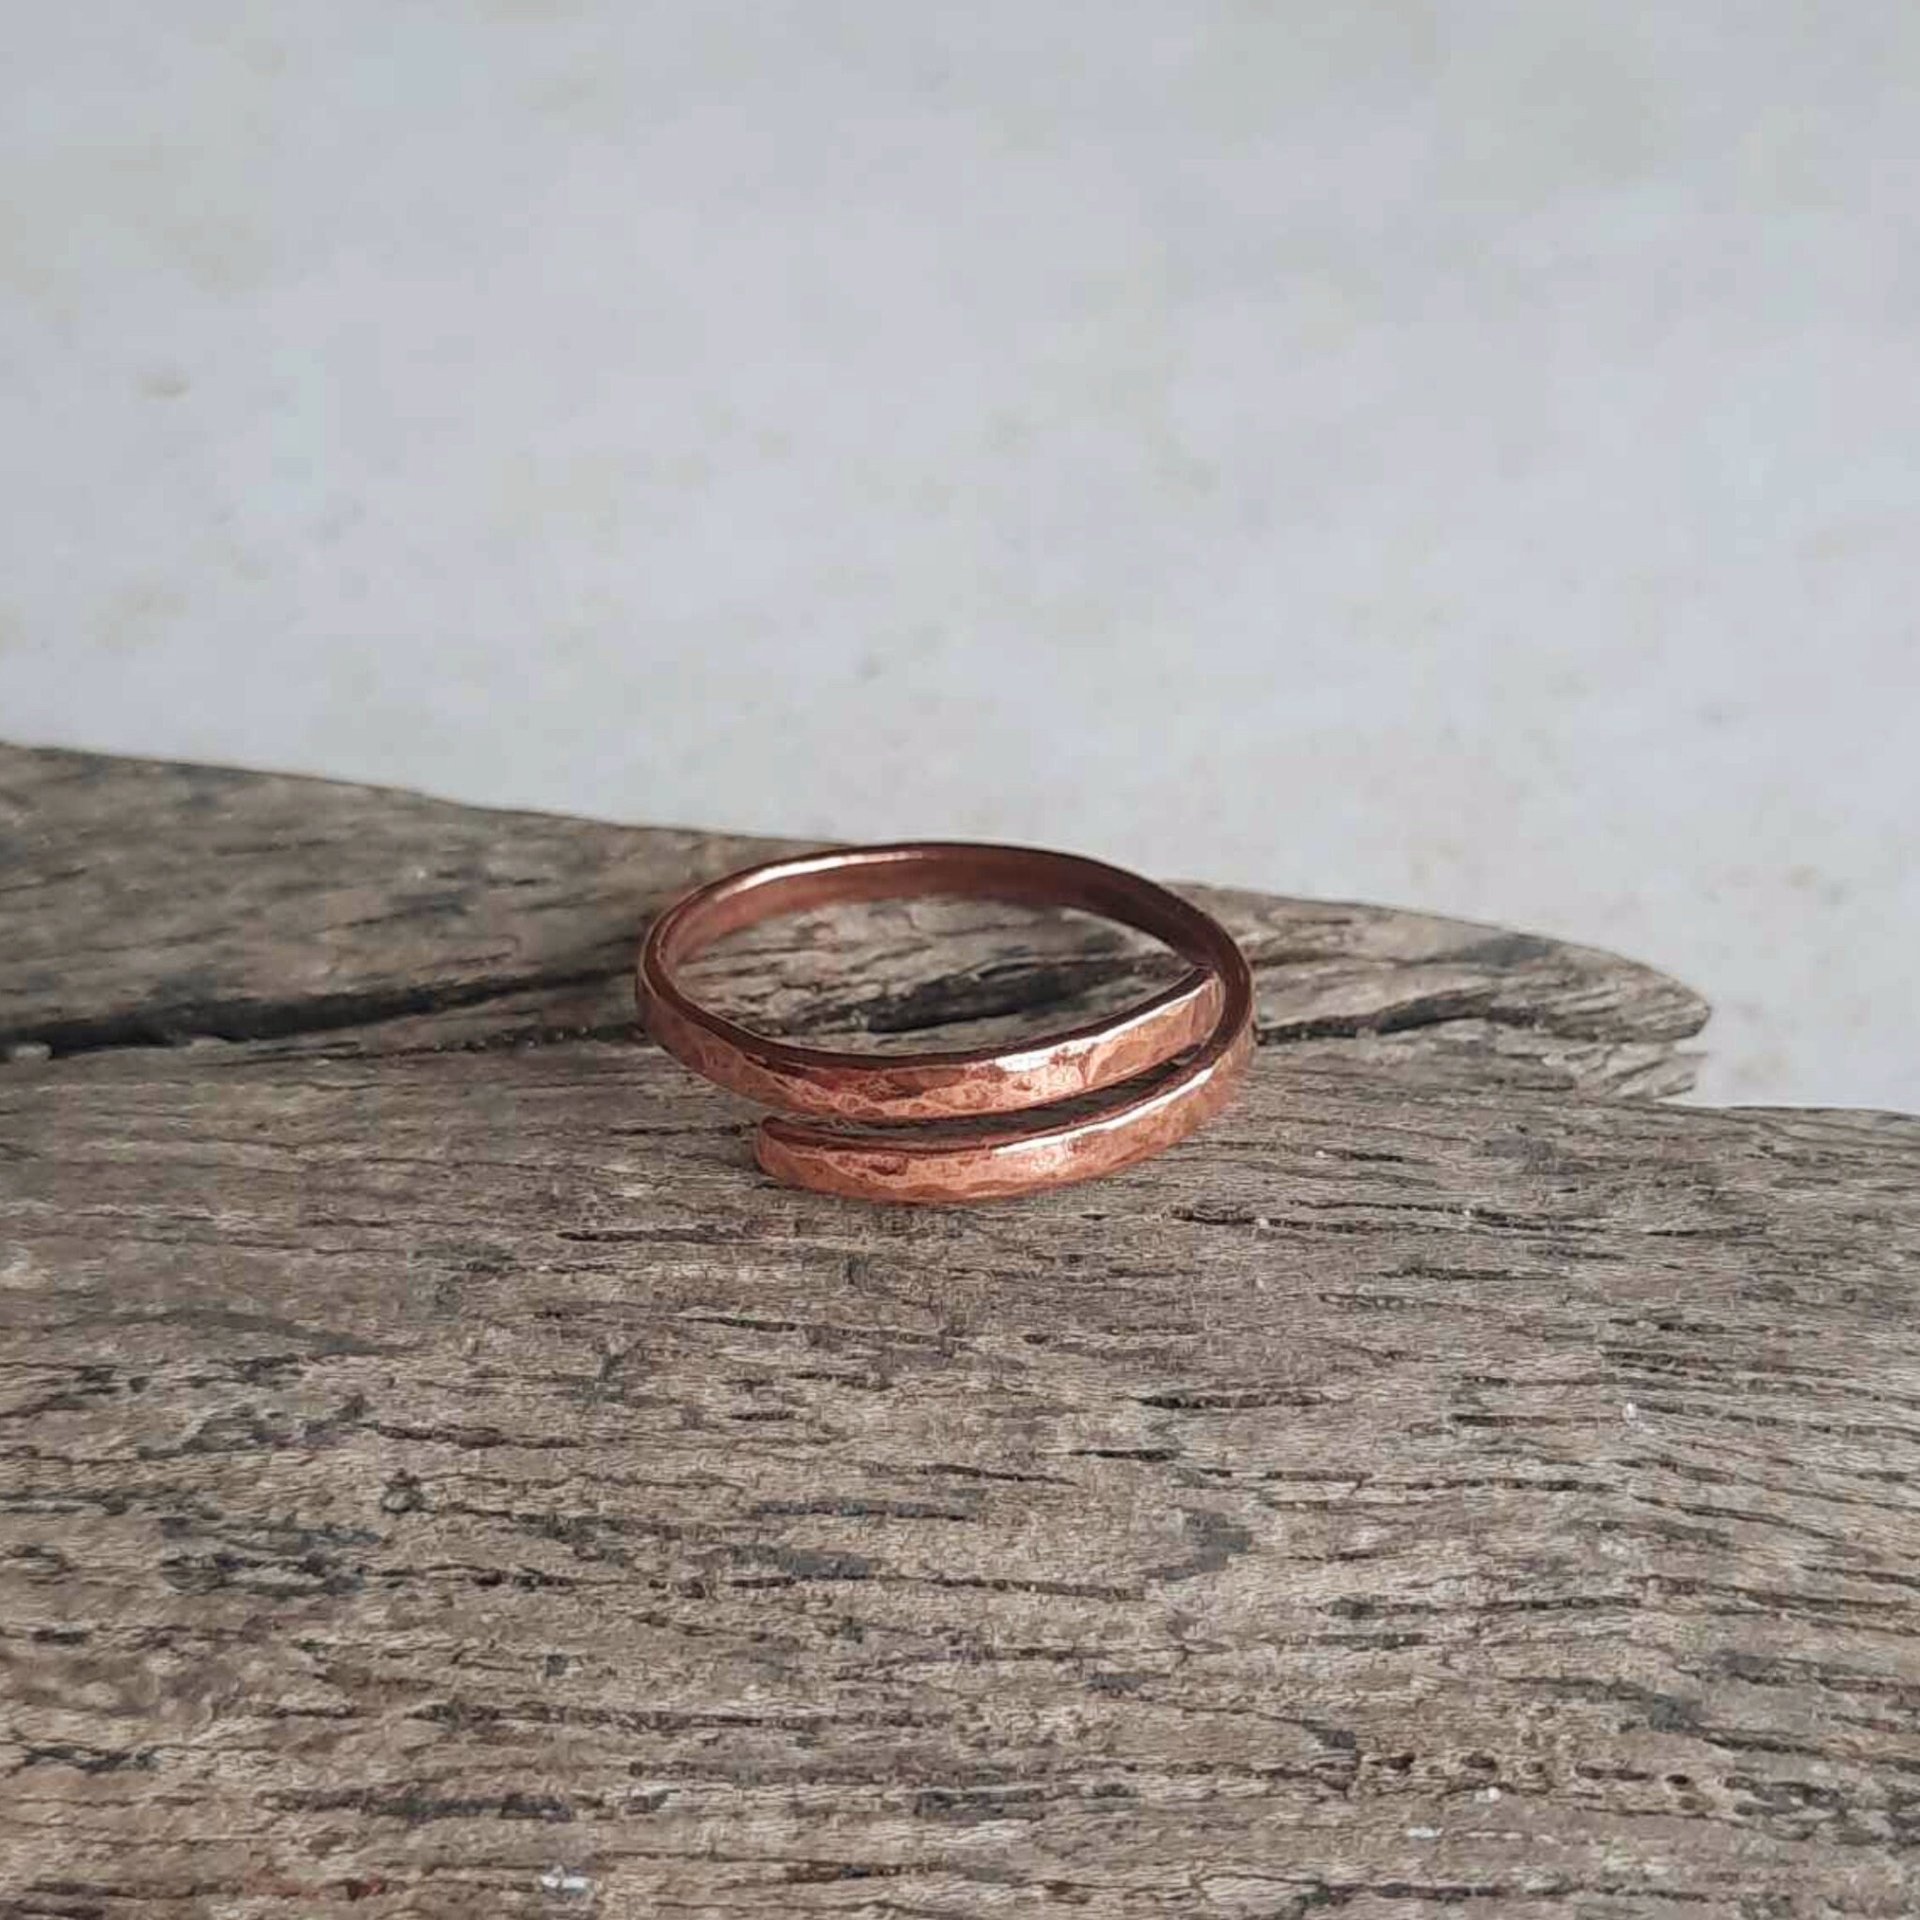 Adjustable copper spiral finger, midi or thumb ring, hand crafted by The Tiny Tree Frog Jewellery